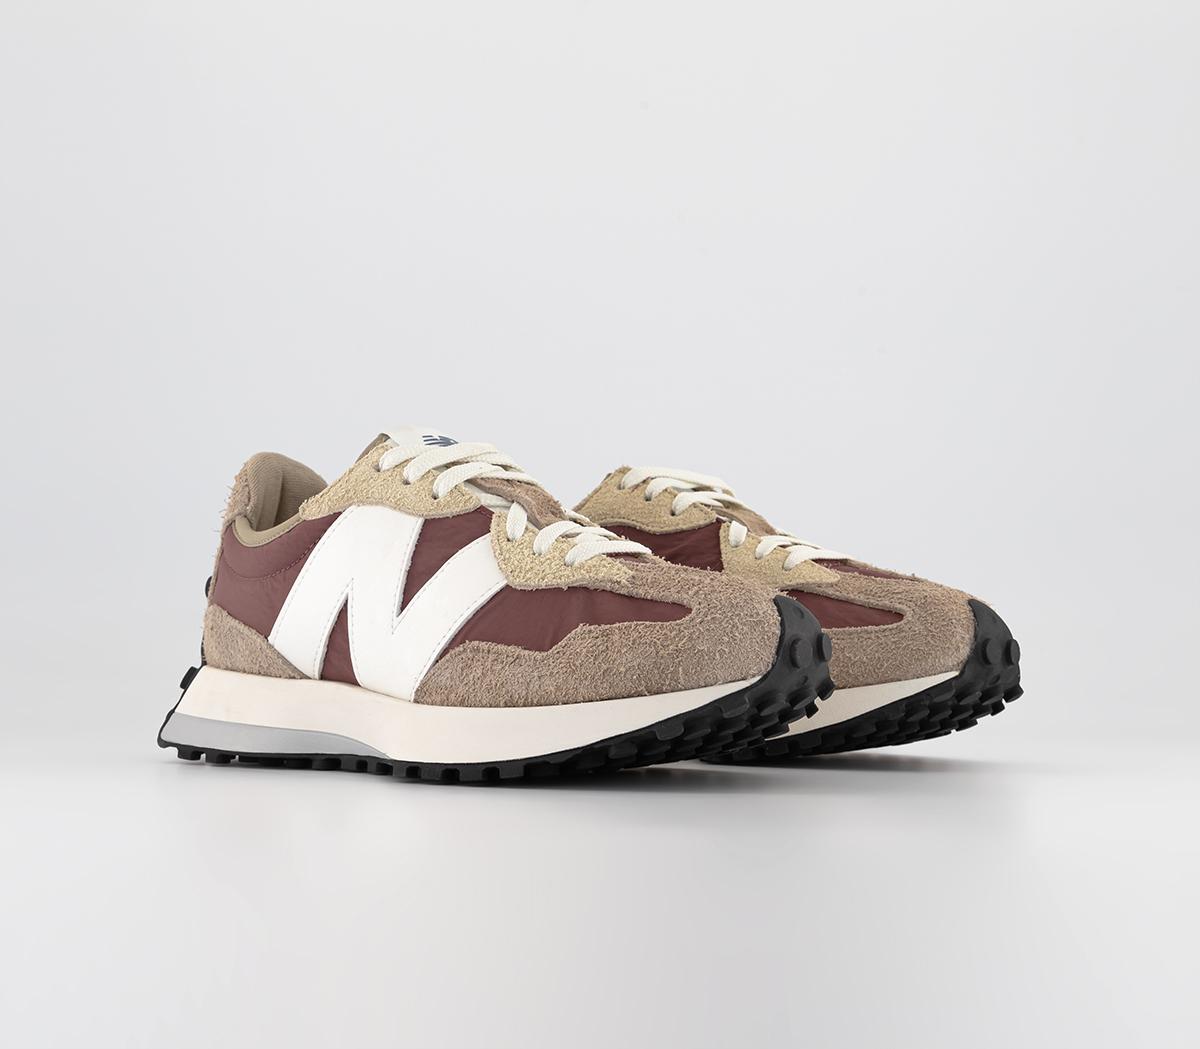 New Balance 327 Trainers Brown Sand White - Men's Trainers